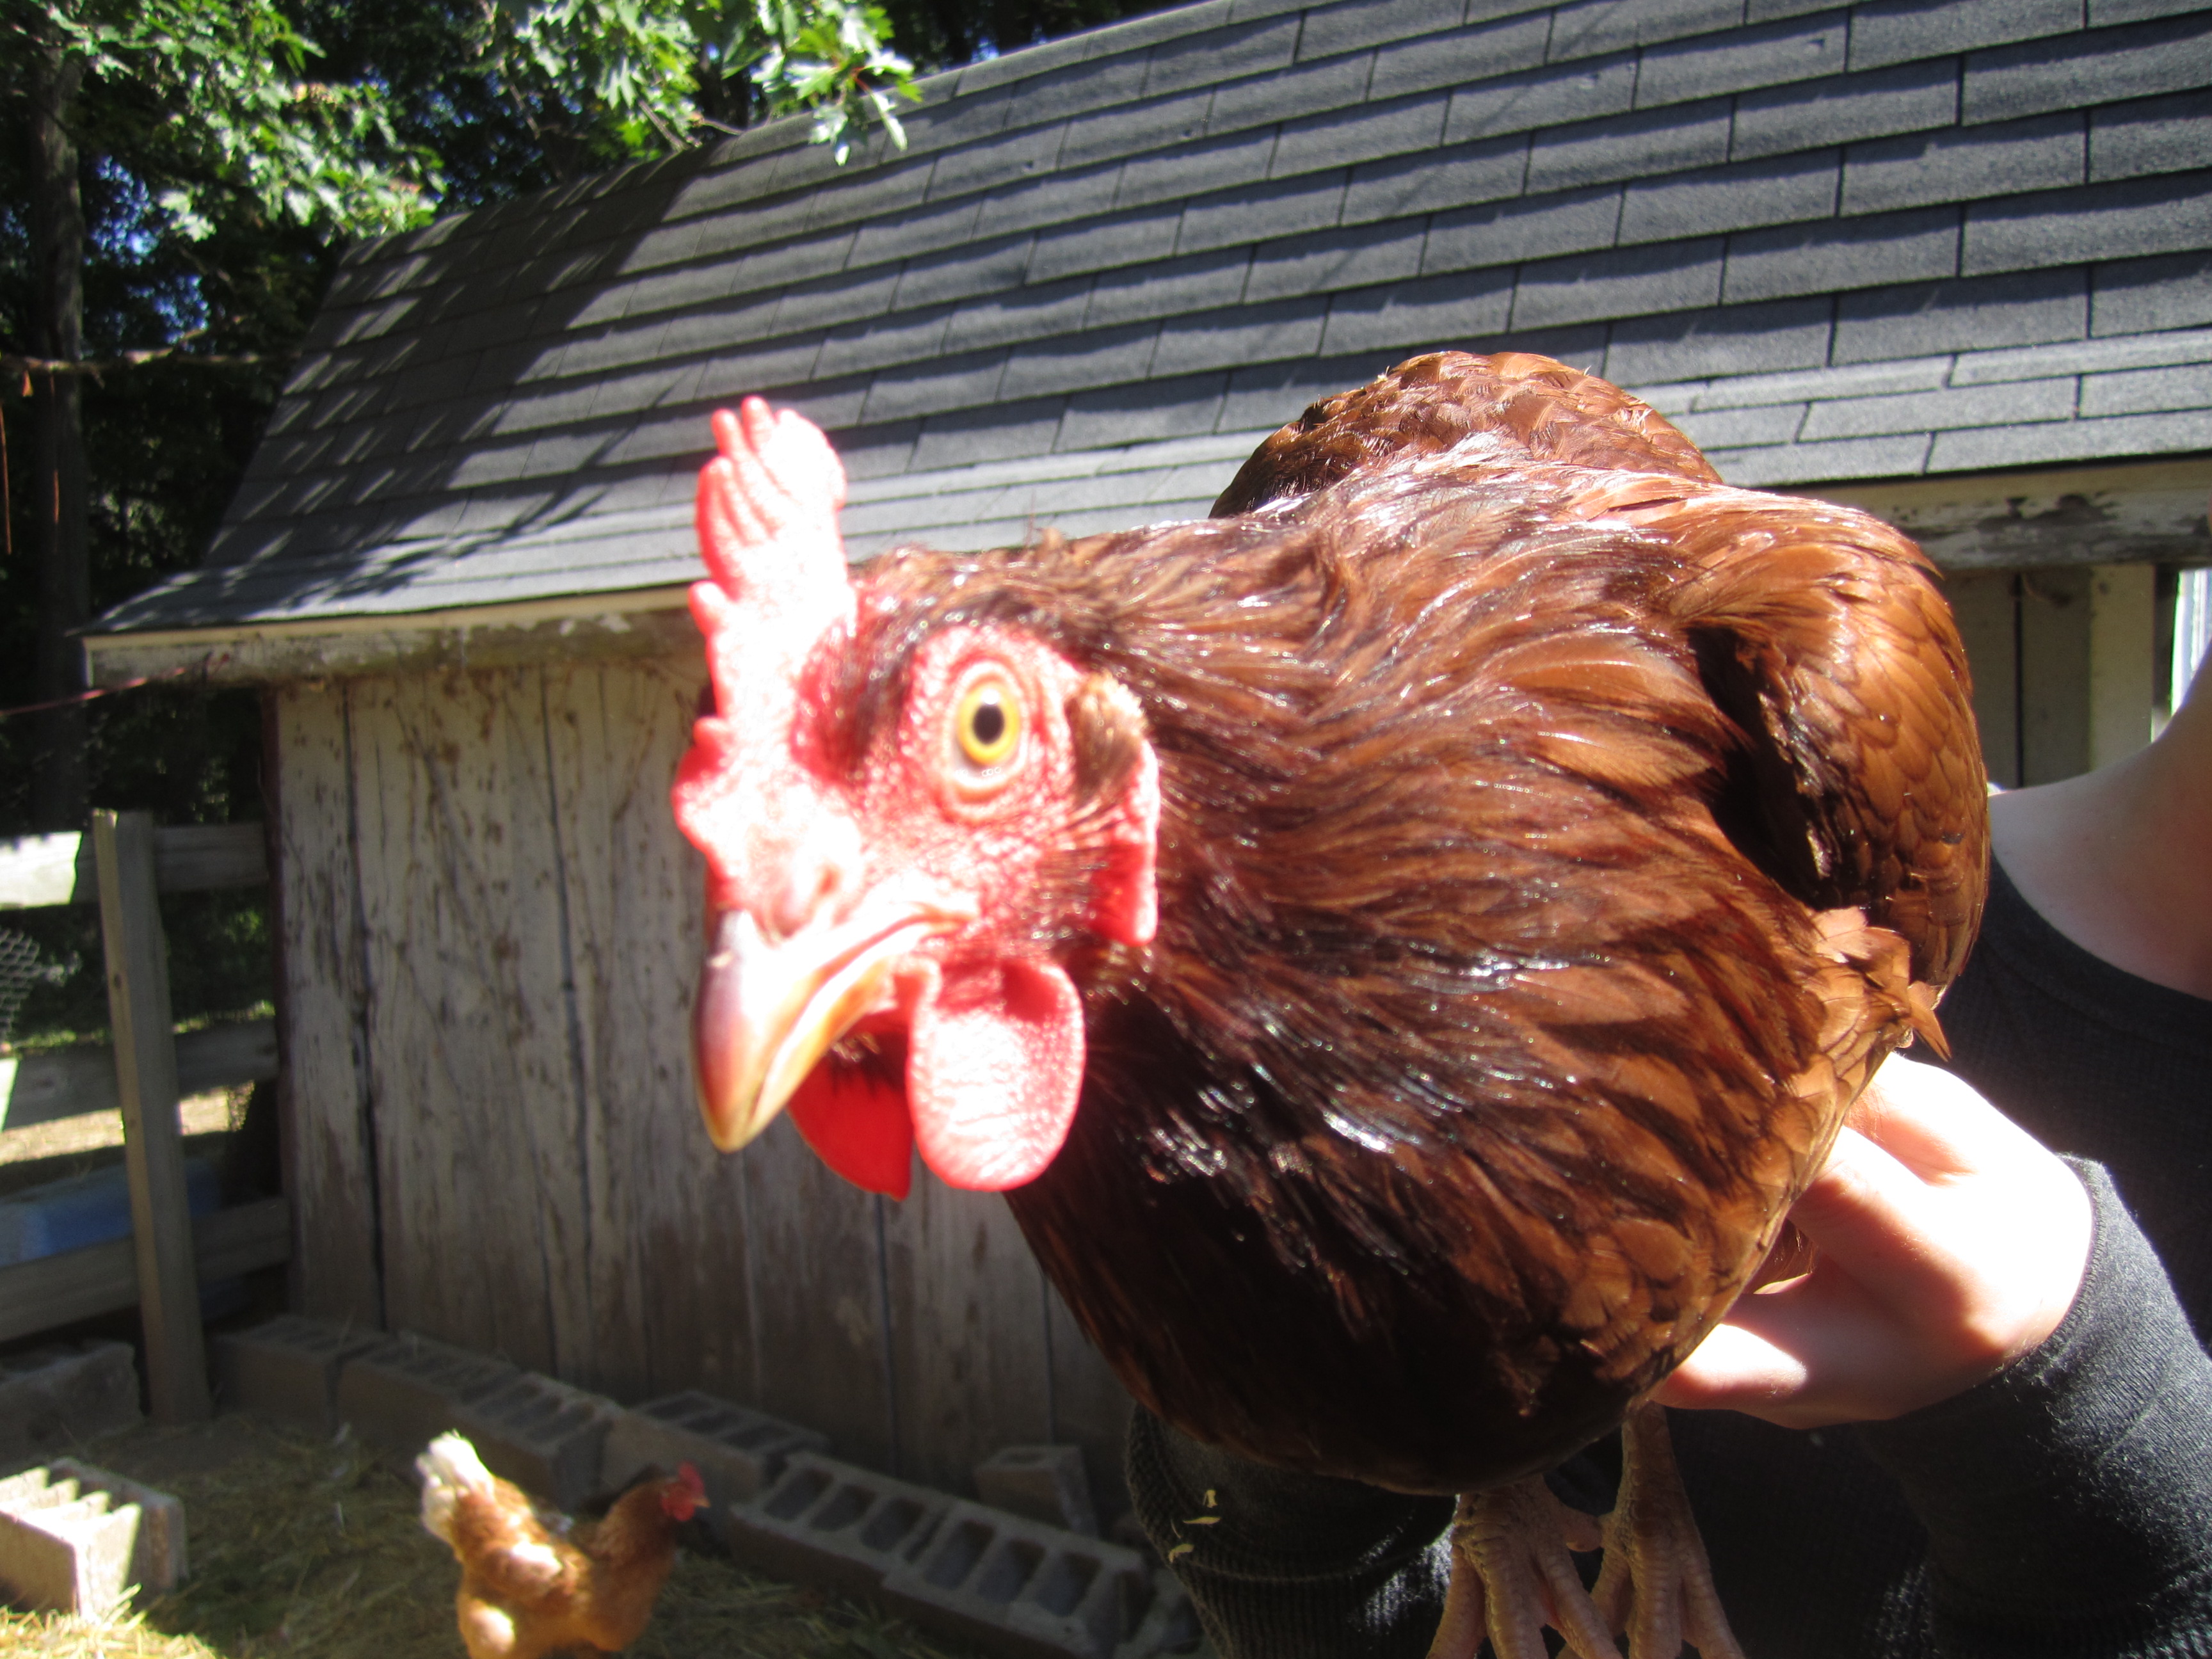 Here's one of my mom's chickens, Stix. Does anyone know what breed it is?